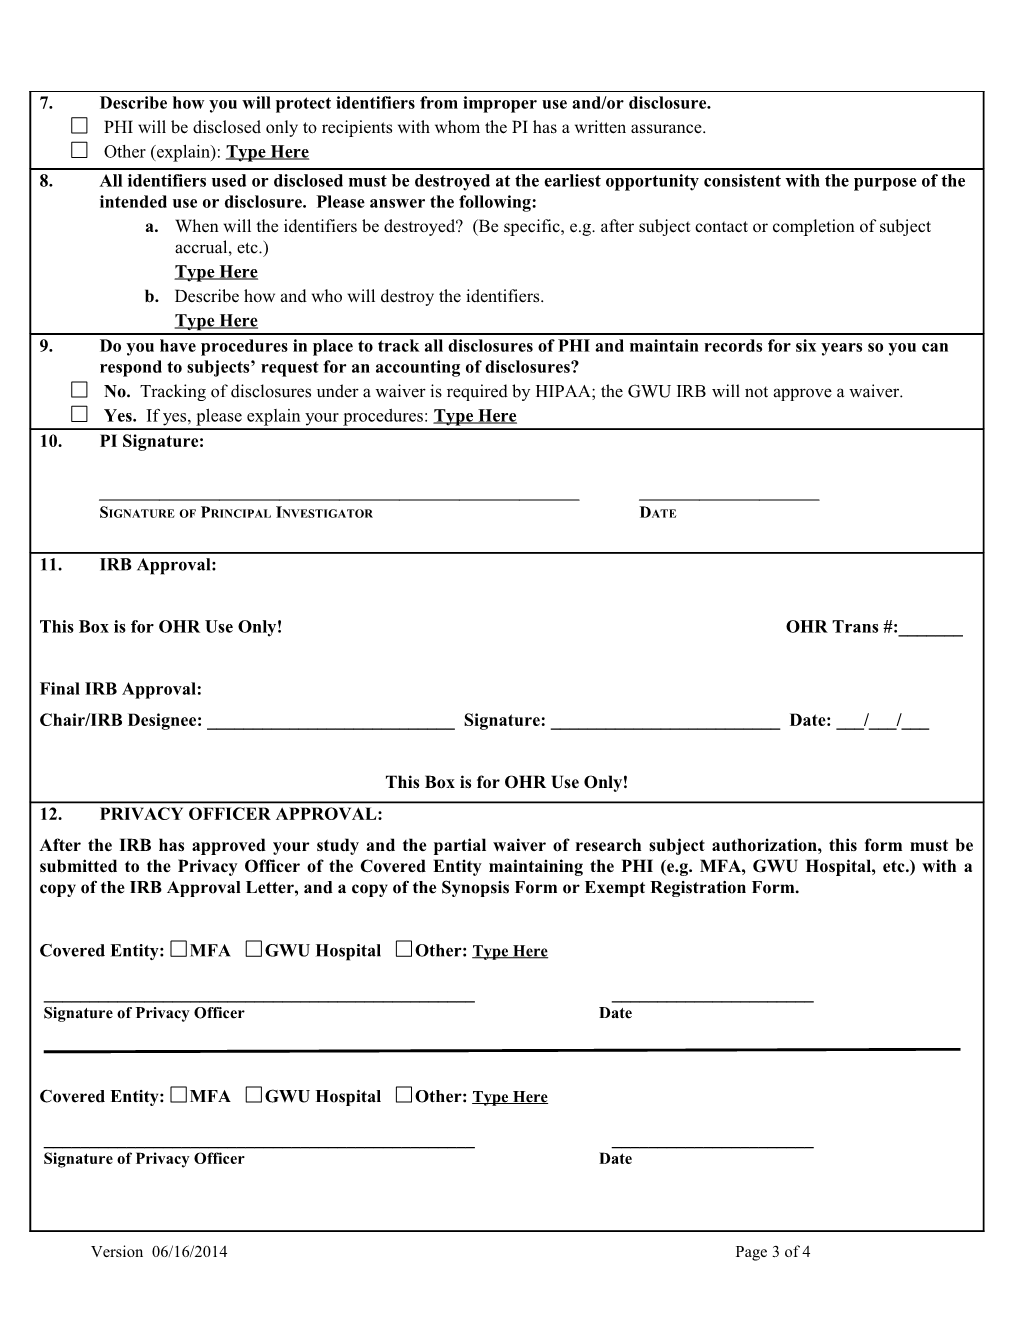 Expedited Review Request Form